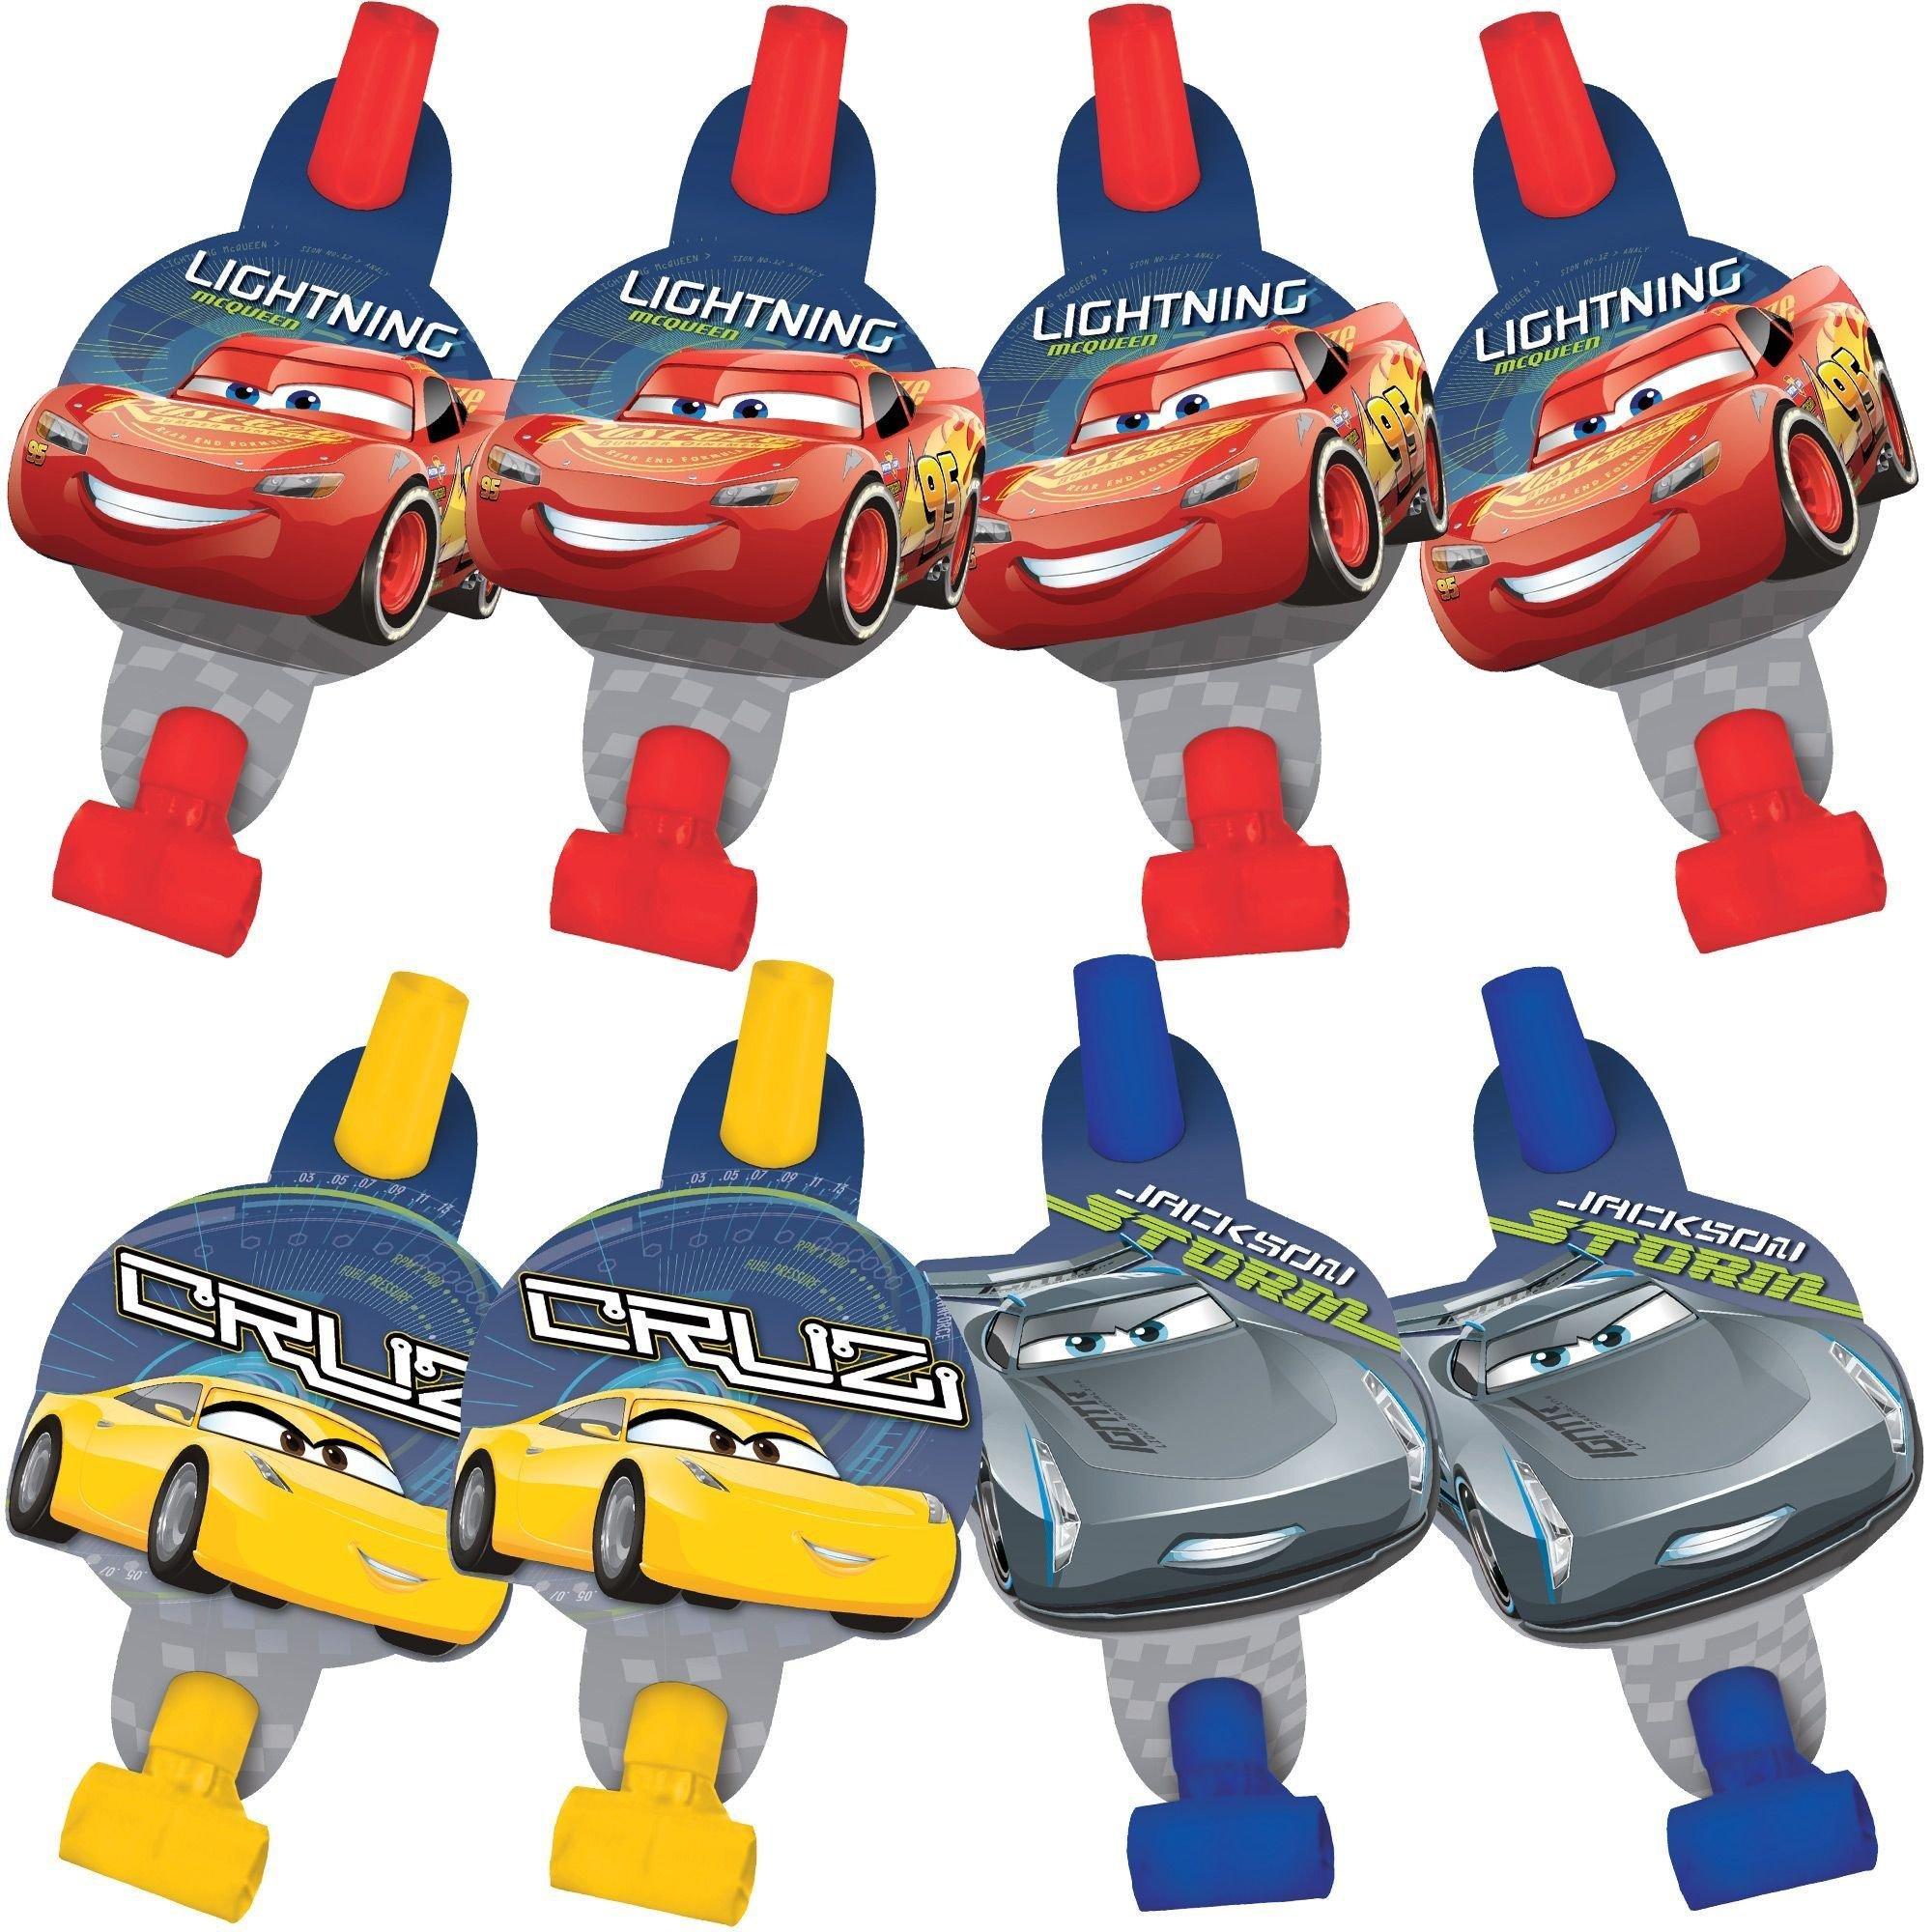 Disney Cars 3 Movie Cars Stickers Party Favors - Bundle with 18 Sheets and  Over 200+ Stickers (Cars Party Supplies)